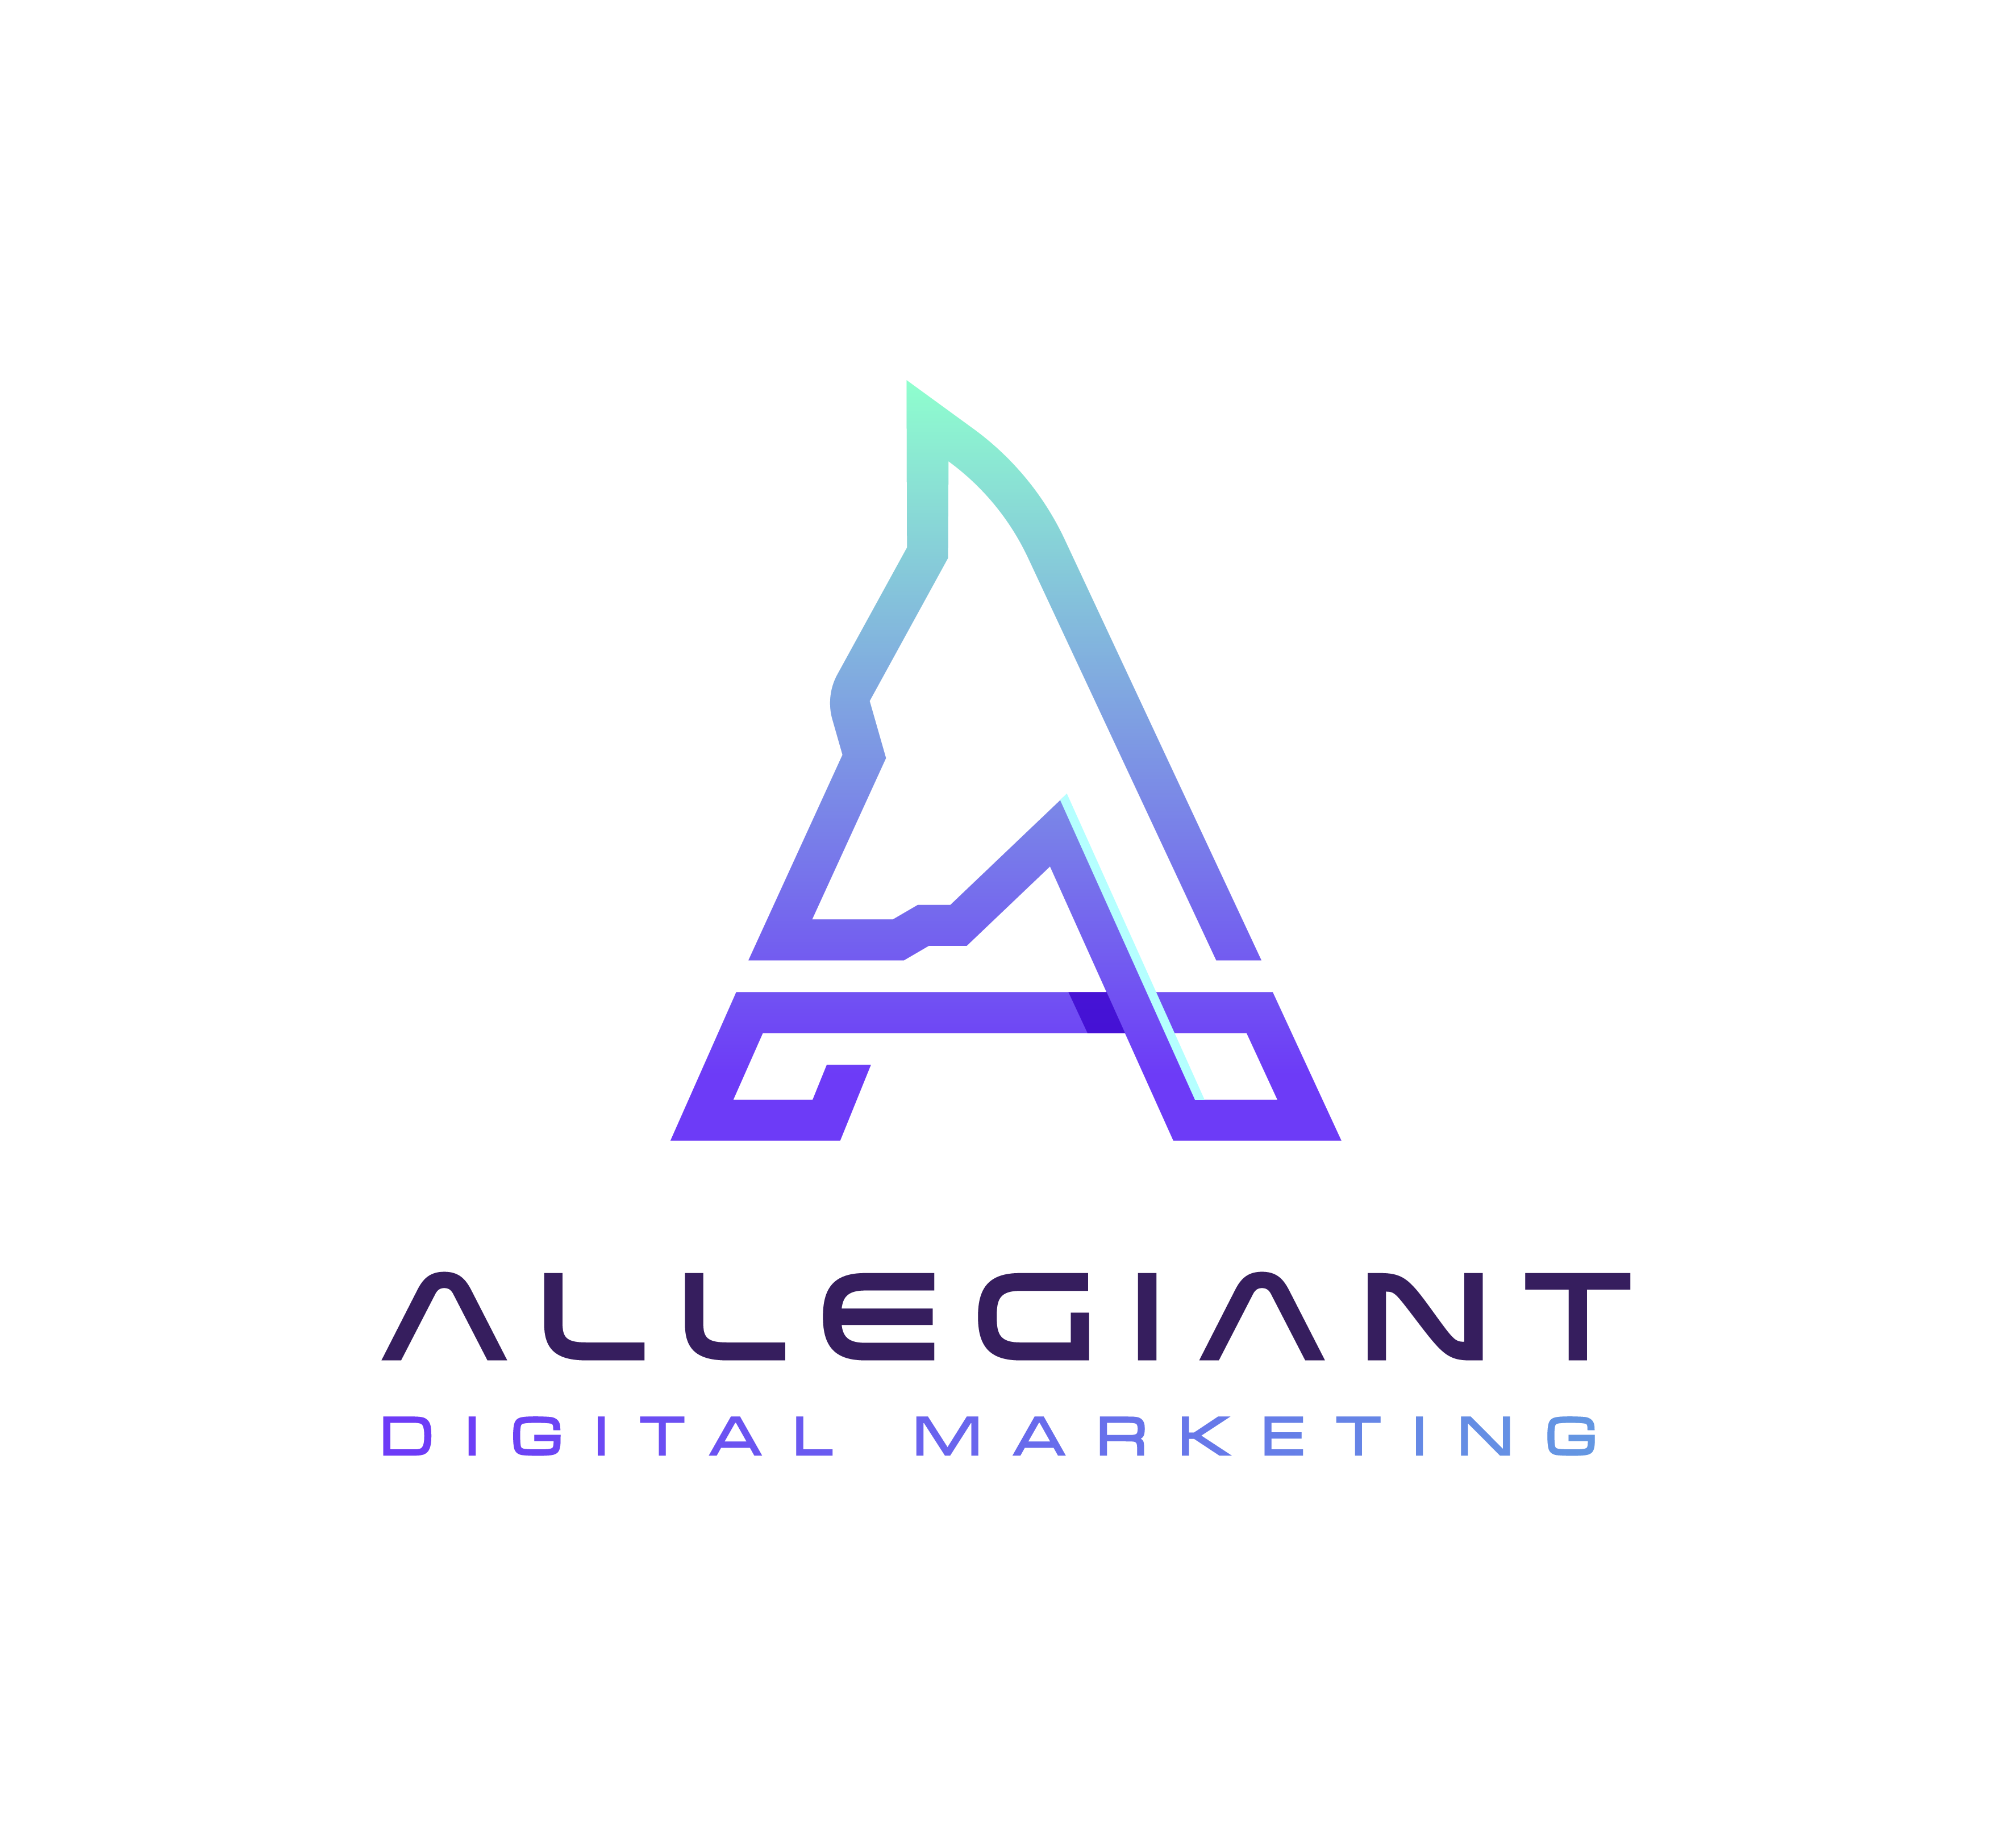 Say Hello to Allegiant Digital Marketing: Where Integrity, Experience, and Innovation Meet